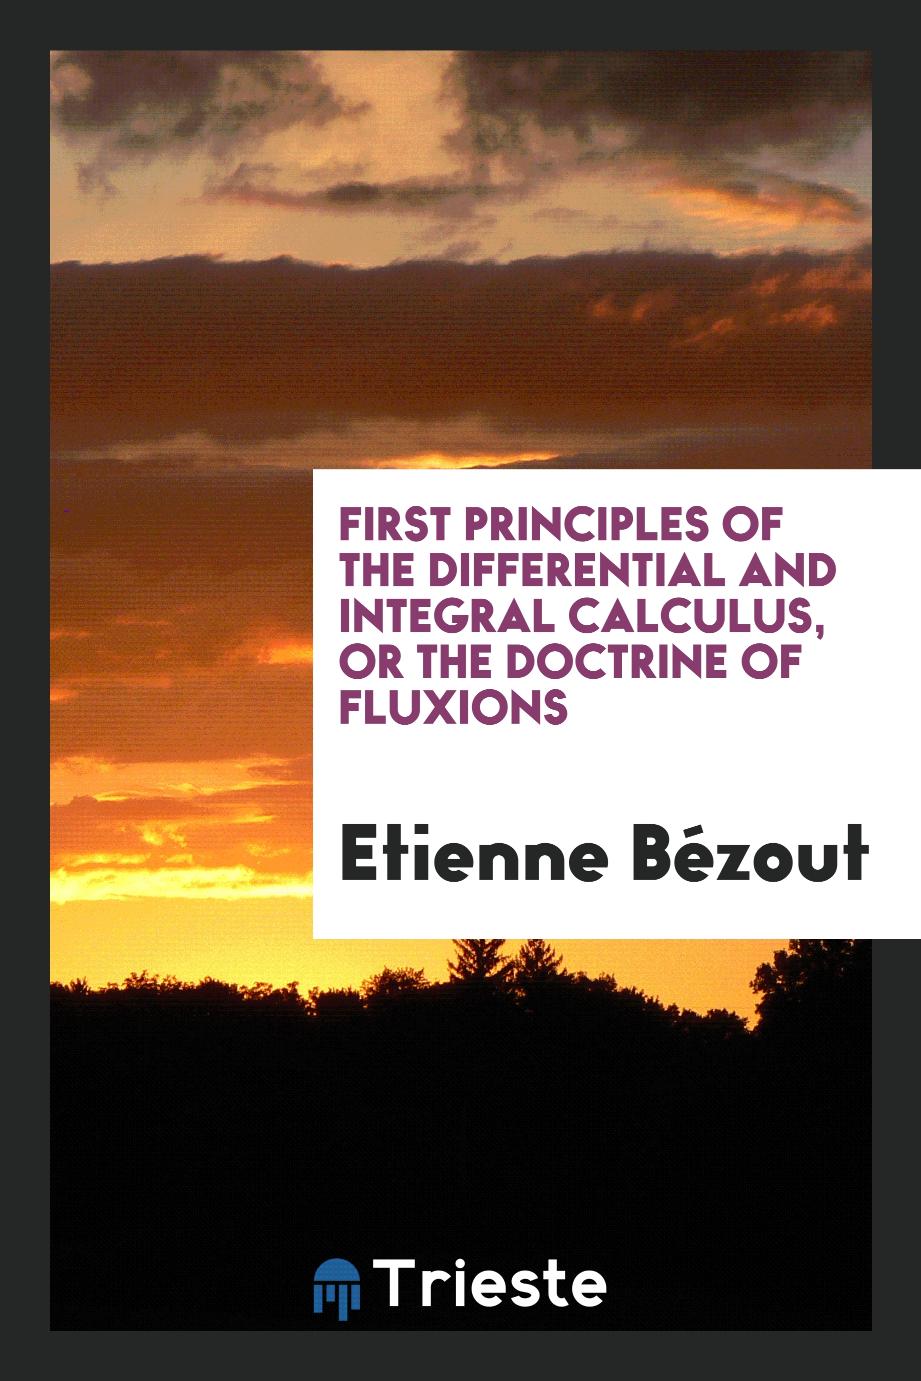 First Principles of the Differential and Integral Calculus, or the Doctrine of Fluxions